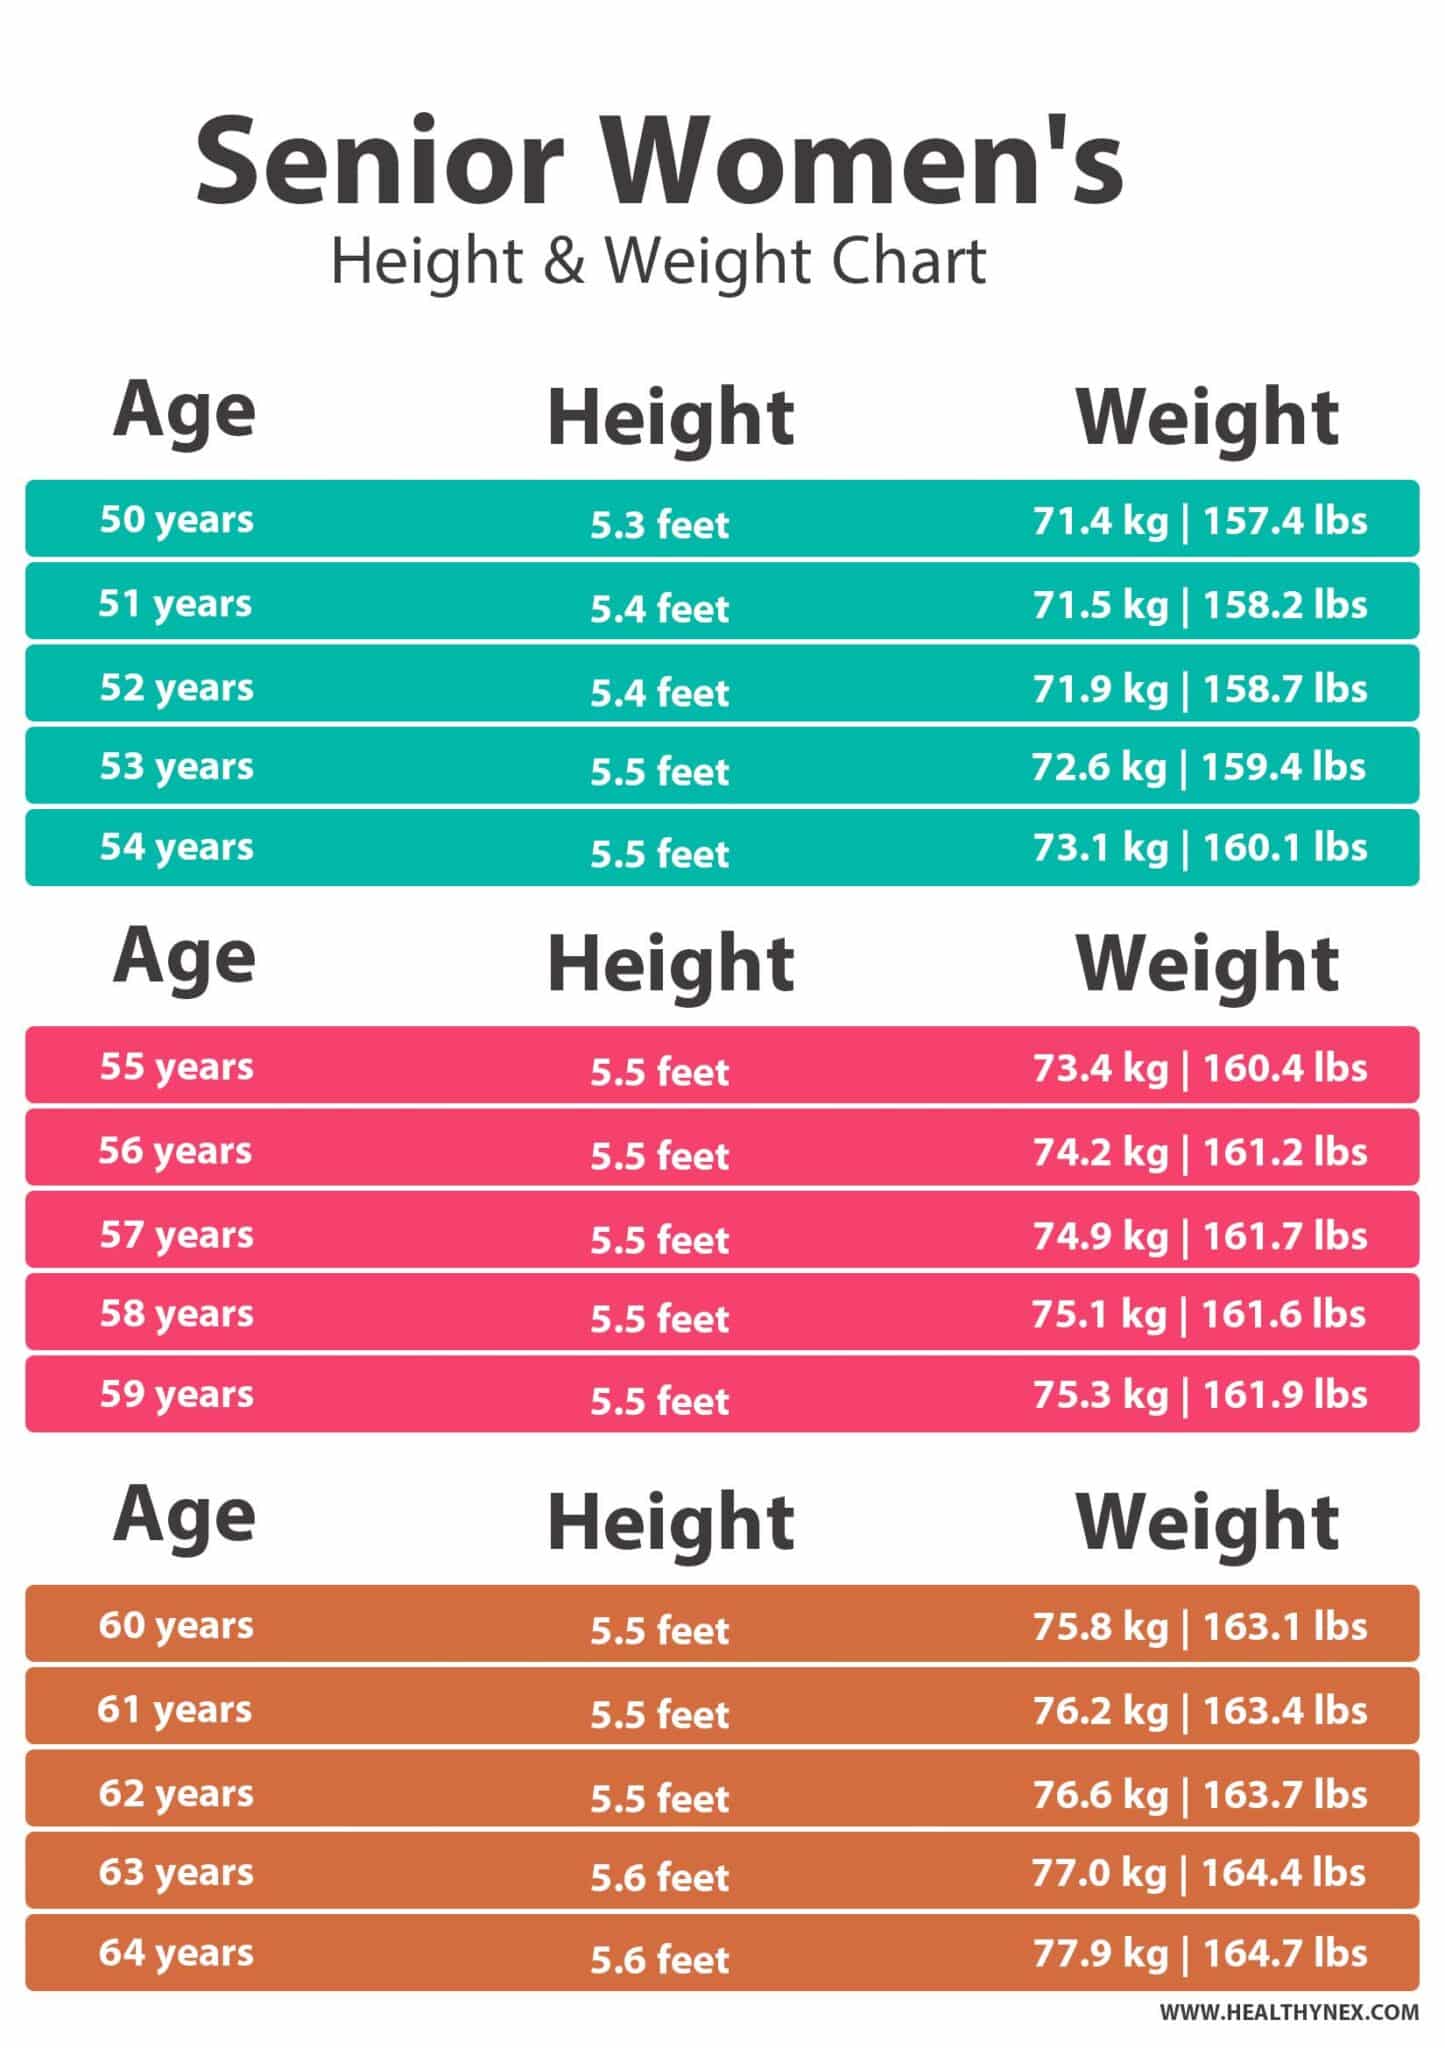 Weight Chart According To Height For